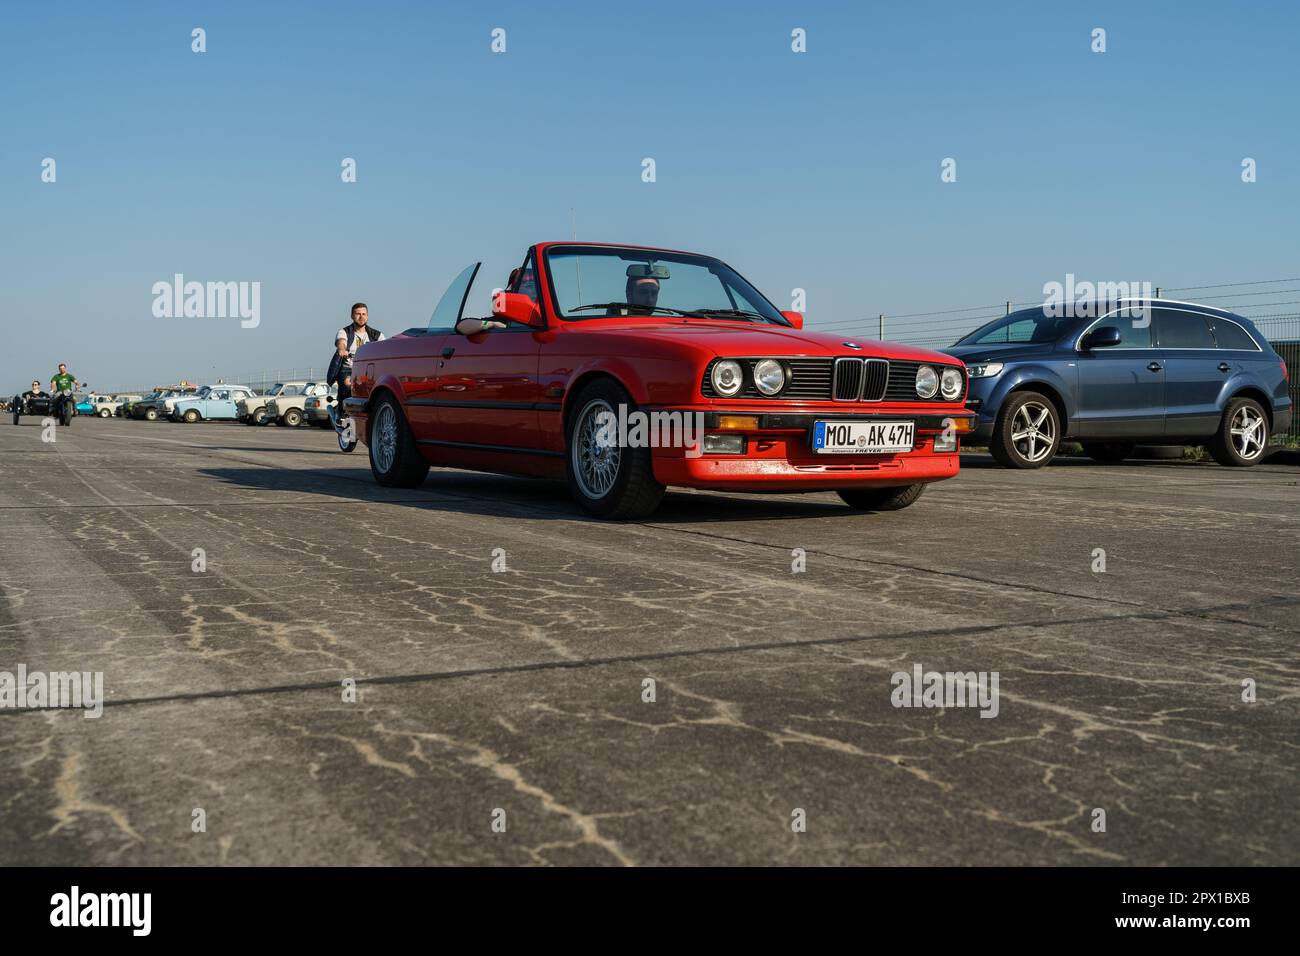 This Pretty Red E30 Sedan Is My Newest Project Car